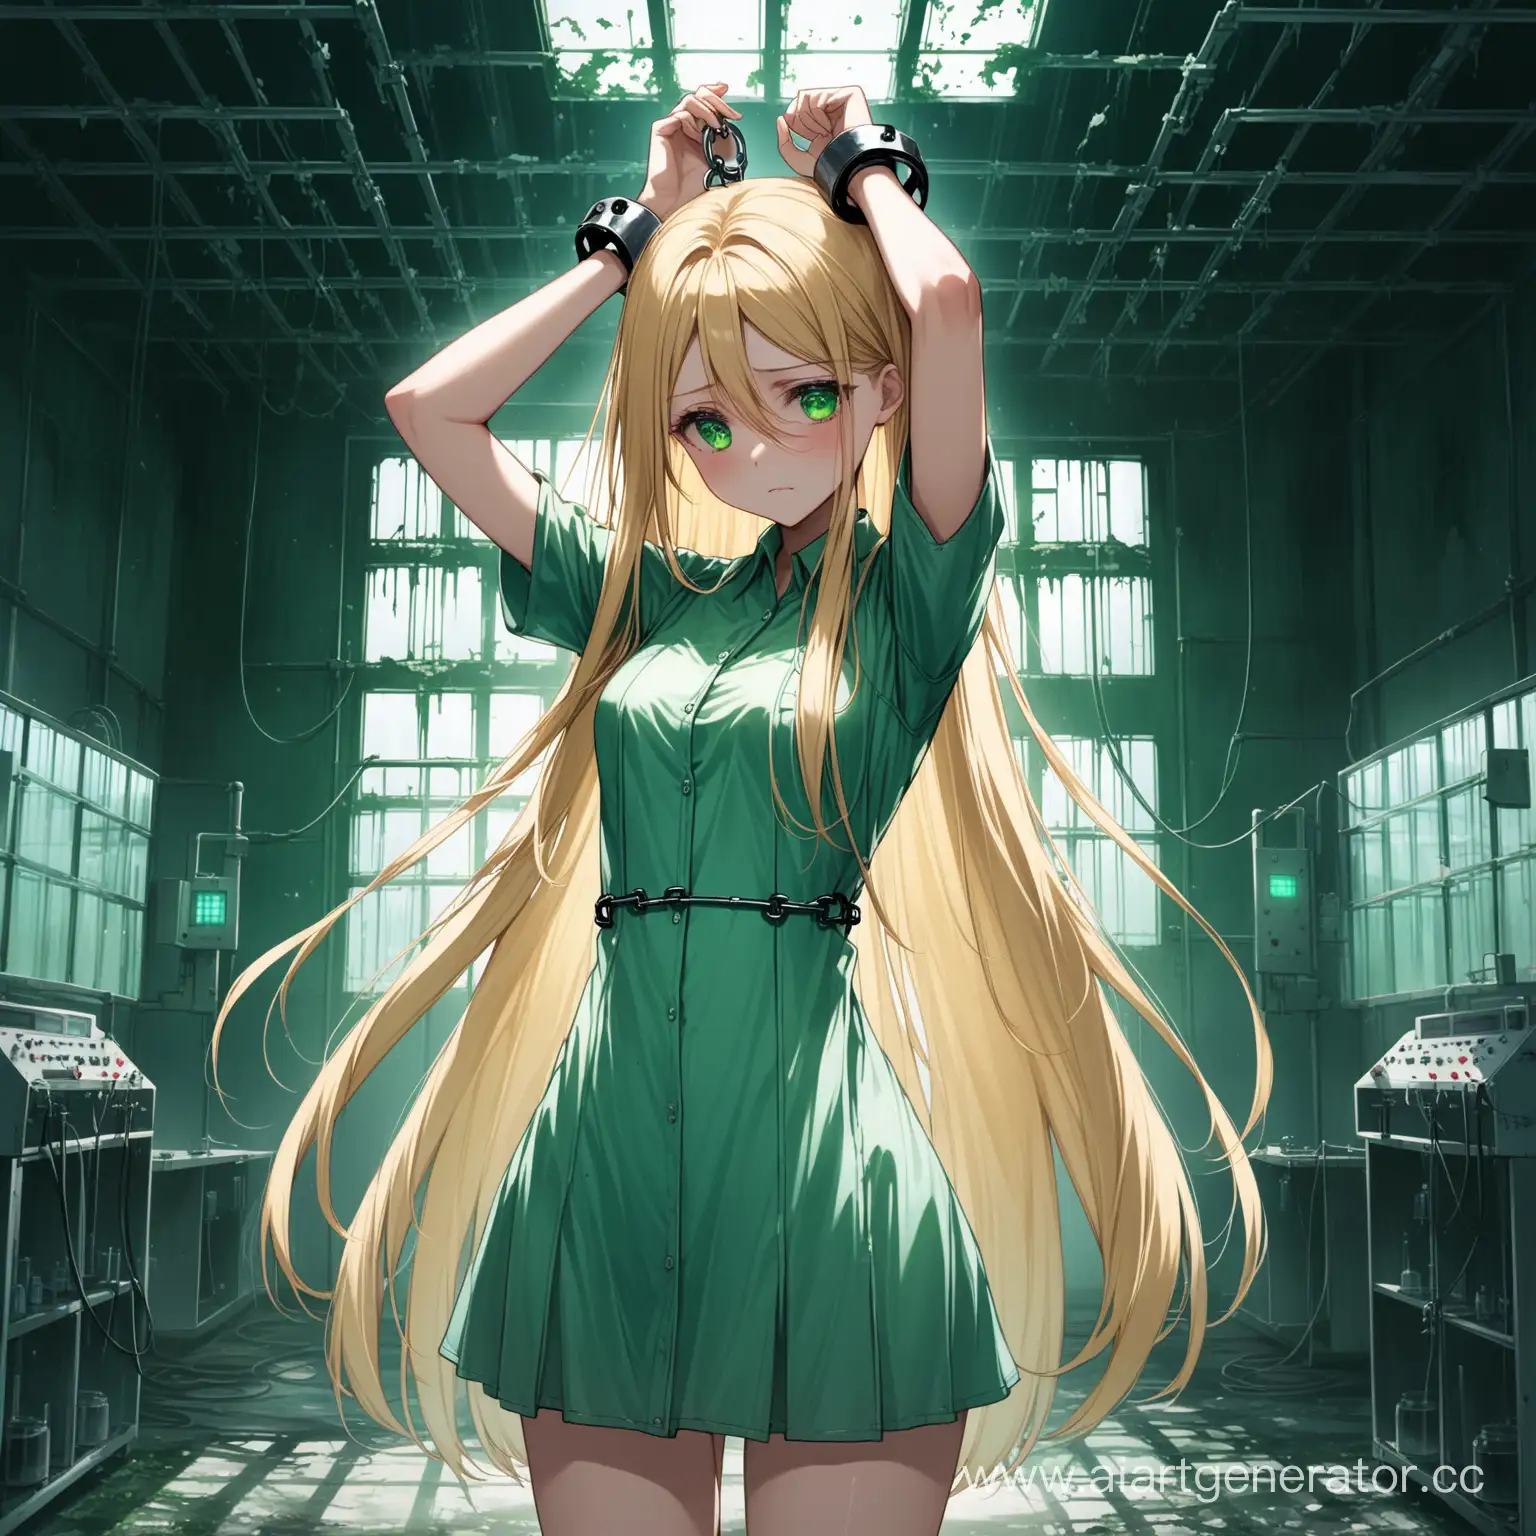 a beautiful girl, long blonde straight hair, green eyes, She is wearing a semi-transparent short dress, She is in an abandoned laboratory for experiments ,her hands are handcuffed above her head, she looks desperate